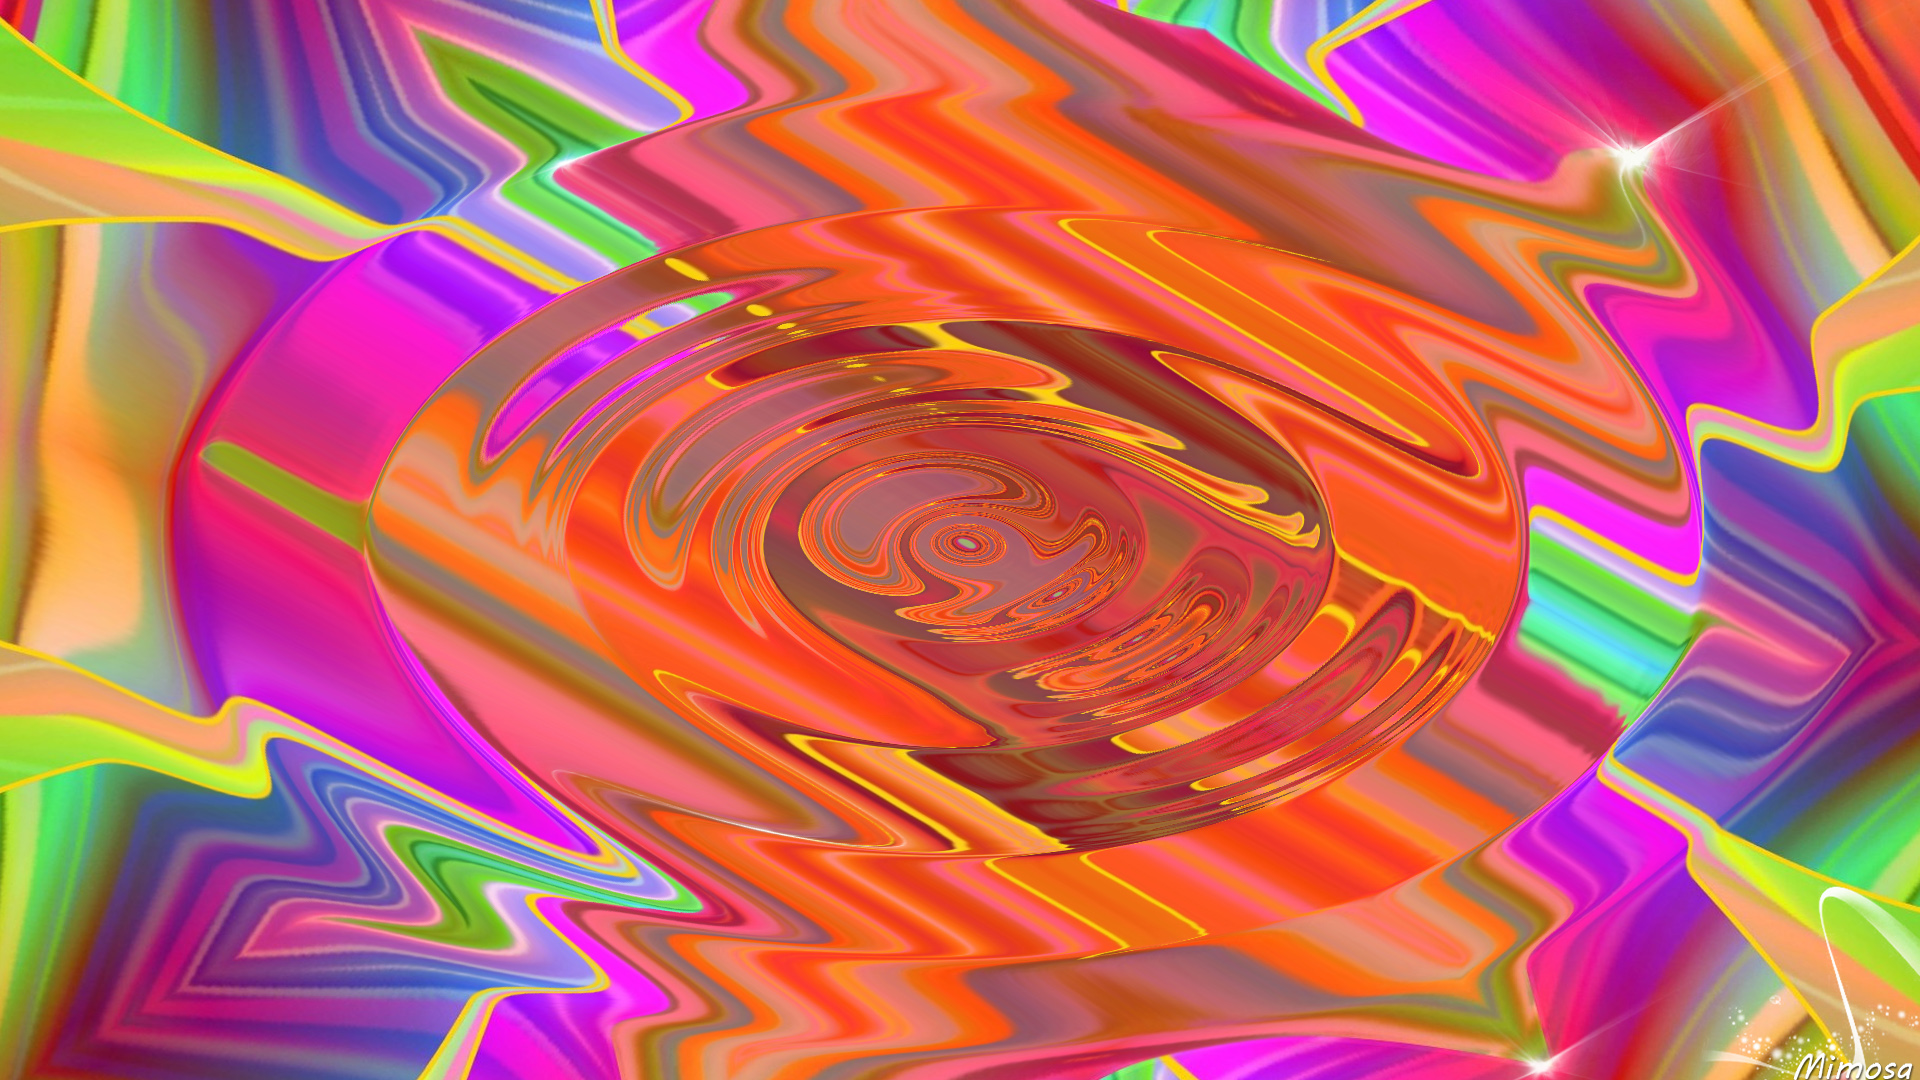 Abstract Artistic Colorful Digital Art Distortion Ripple Wave 1920x1080